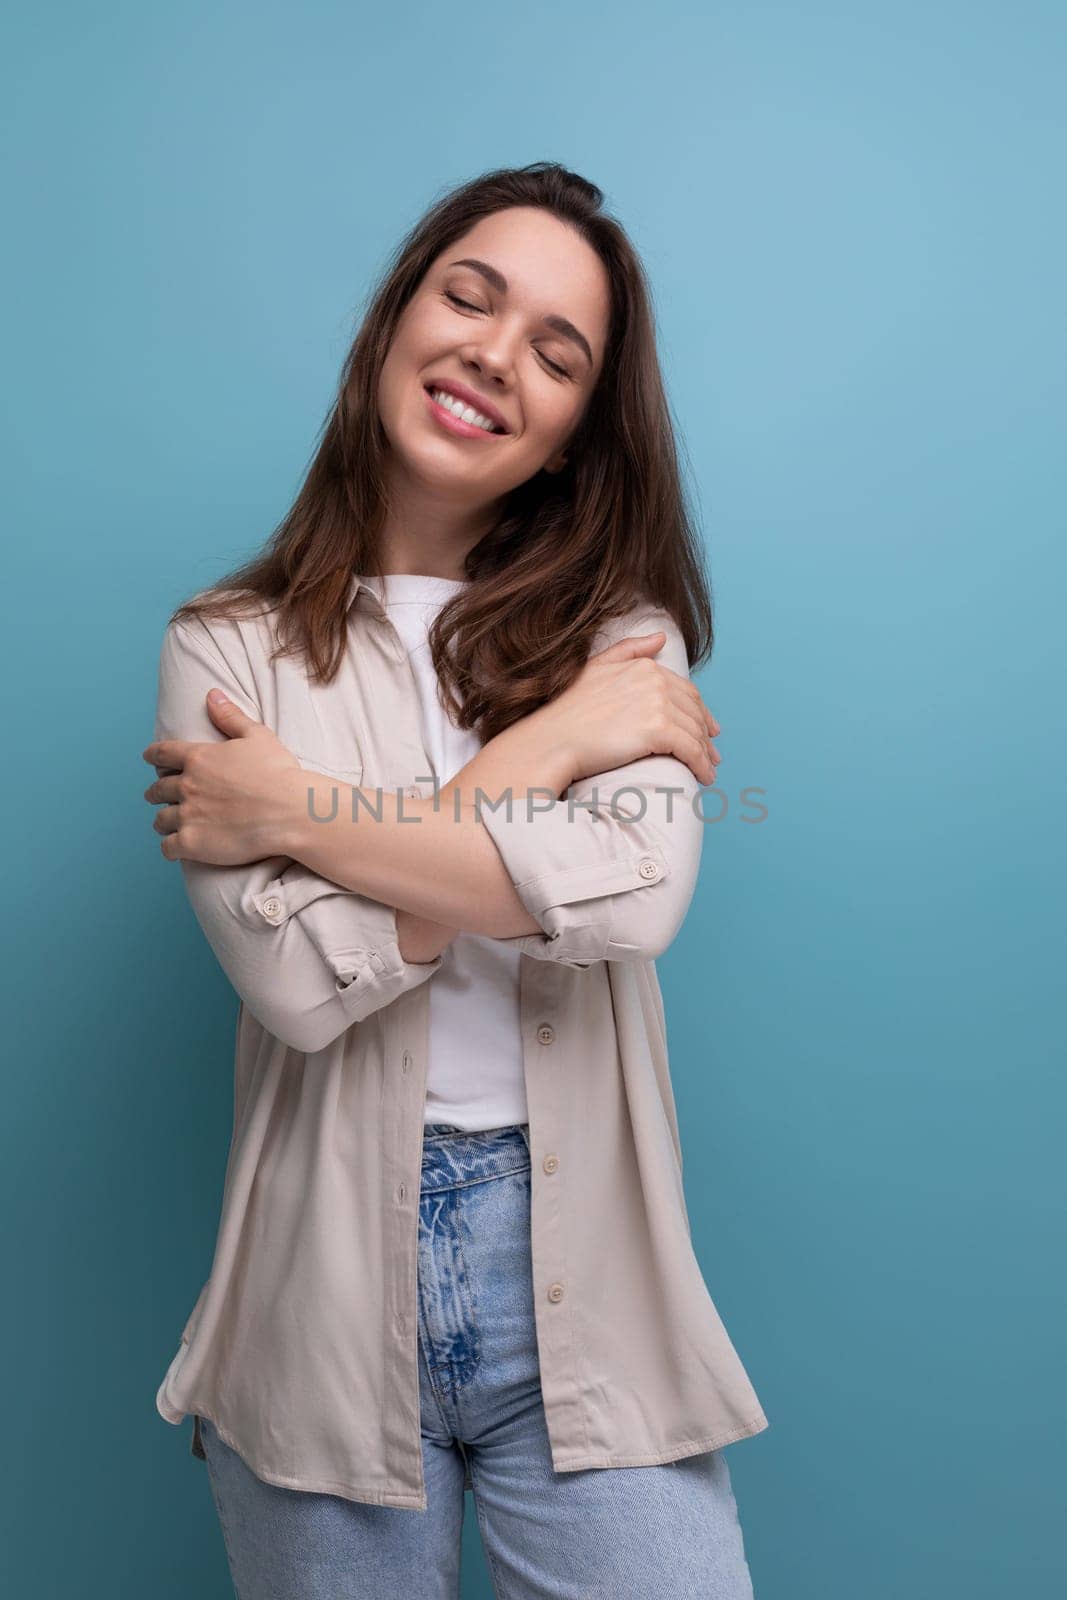 romantic dreaming european young brunette woman in shirt and jeans on blue background.